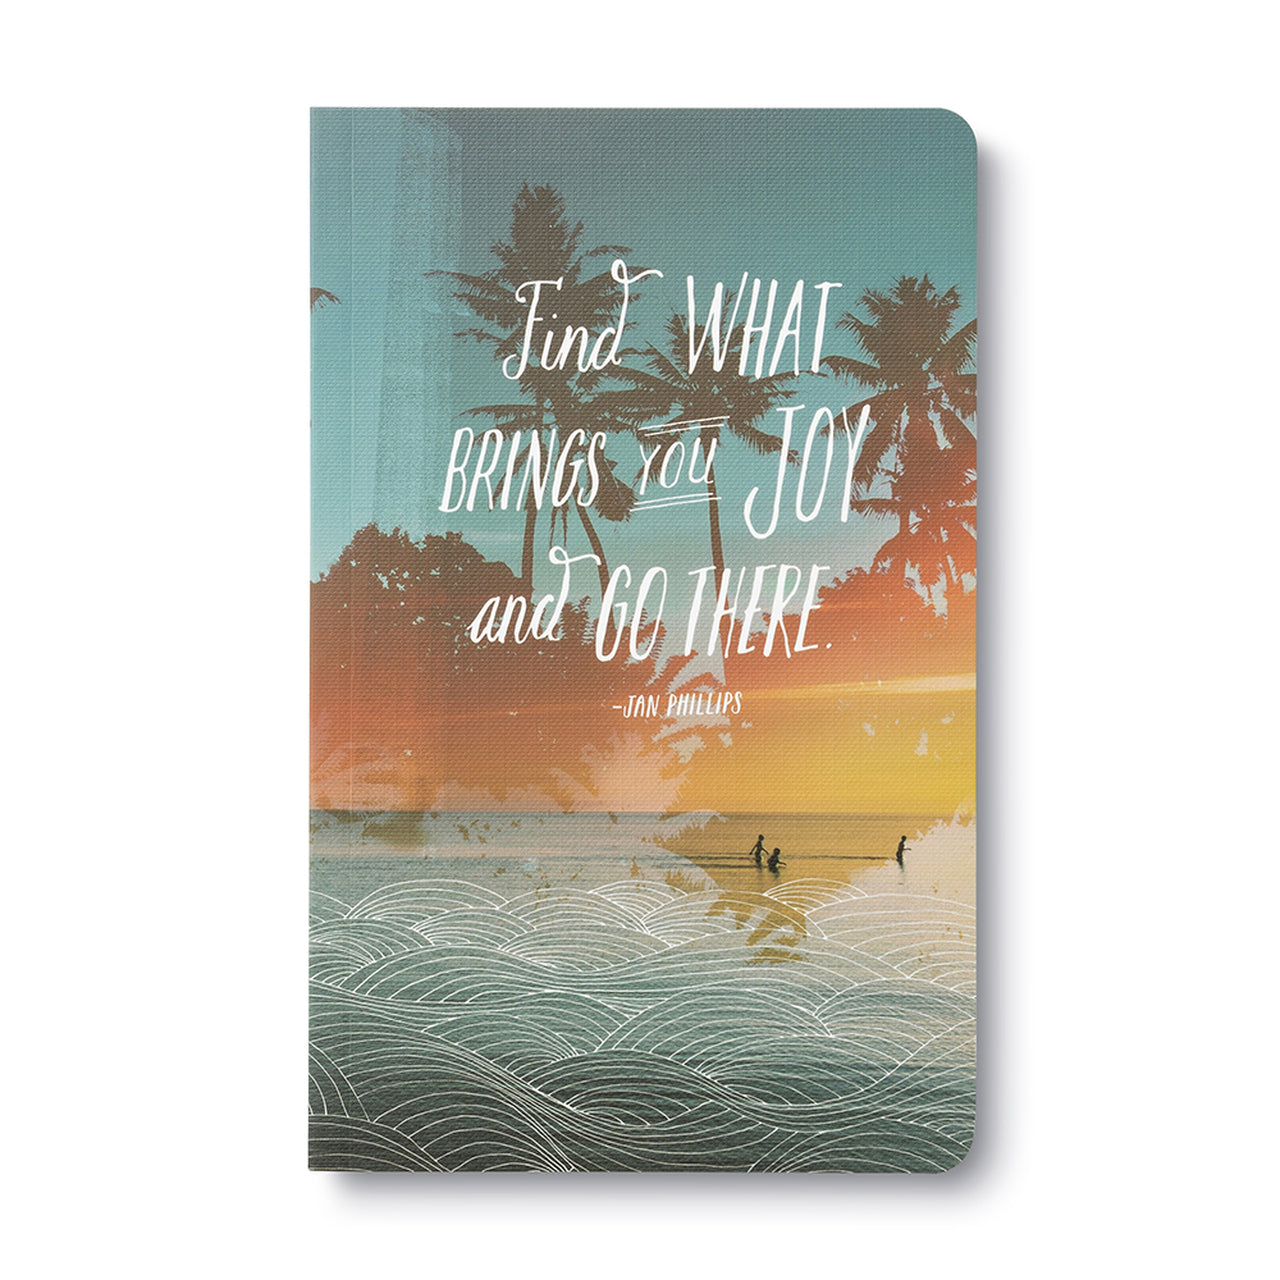 Find What Brings You Joy and Go There - Journal